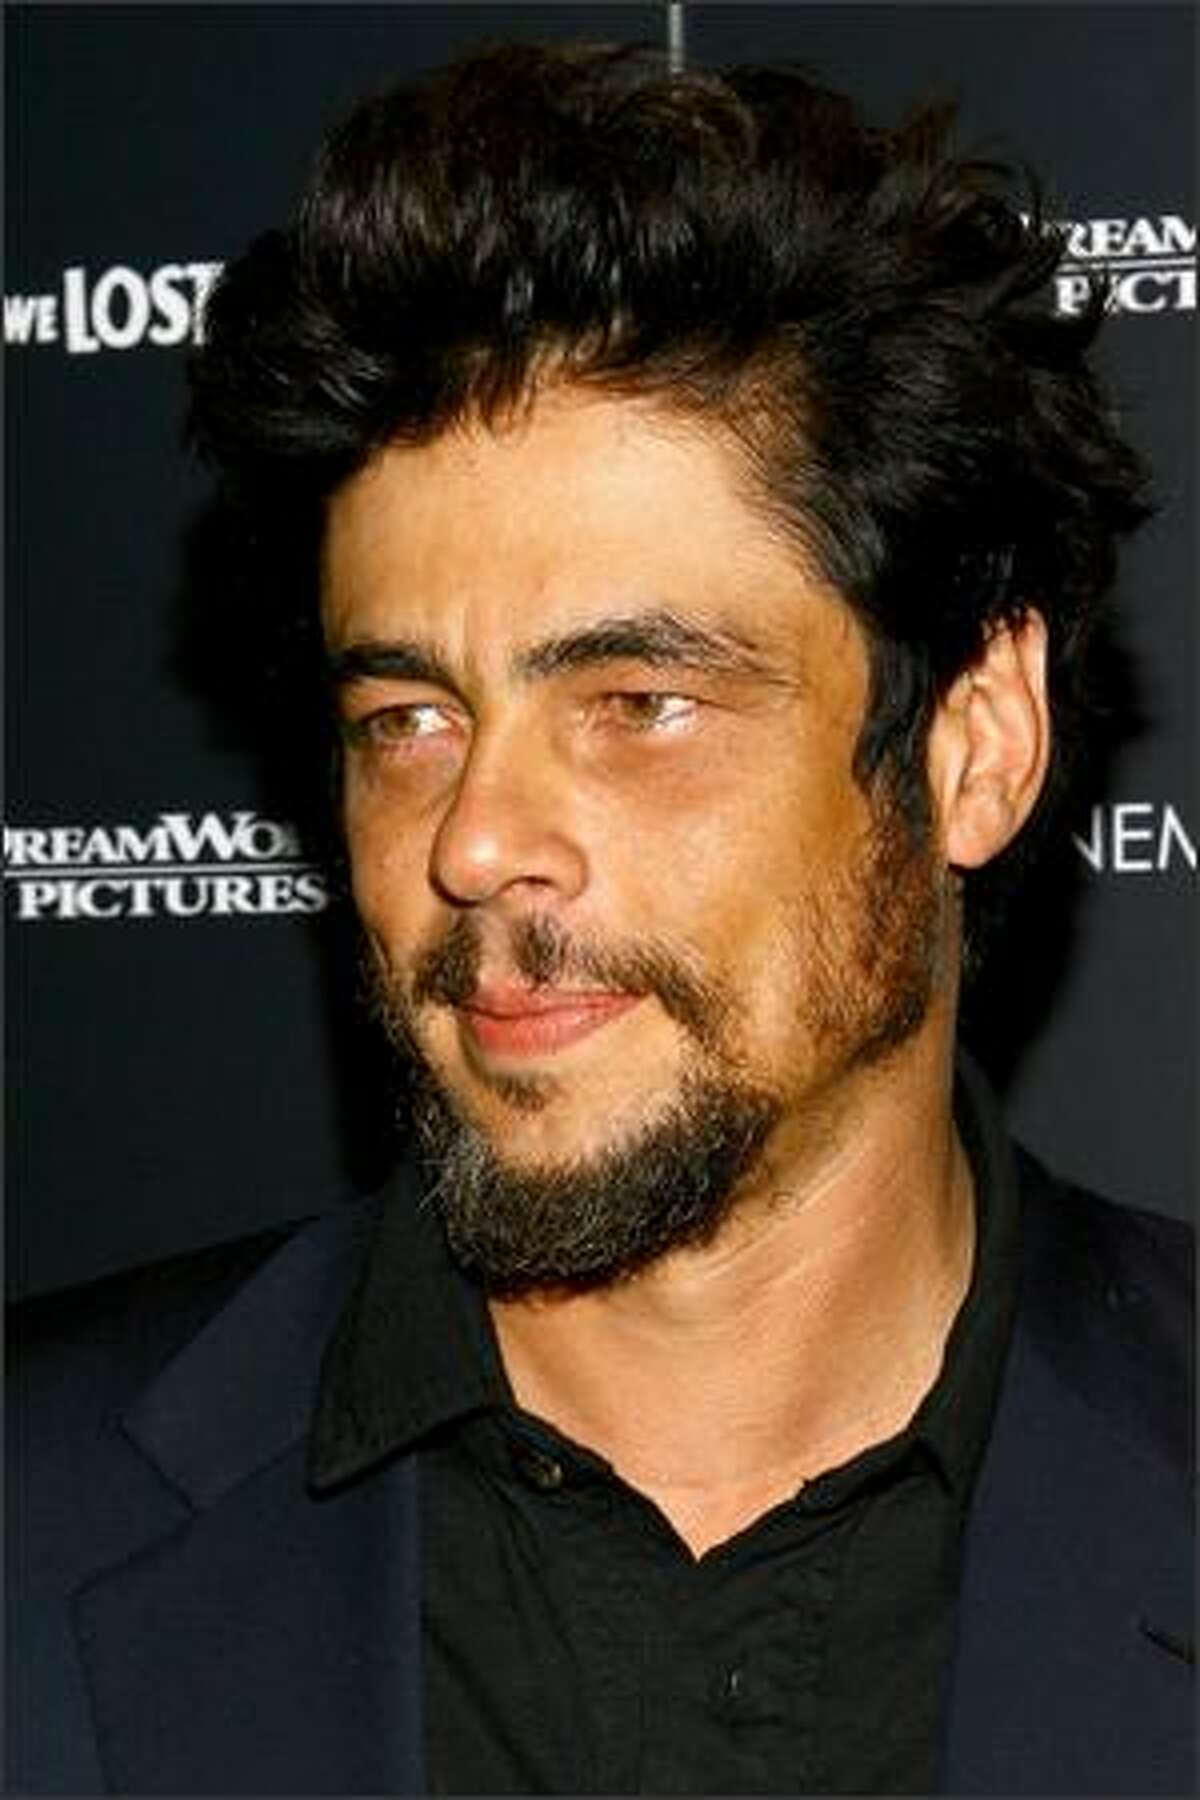 Actor Benicio Del Toro attends the premiere of "Things We Lost In The Fire" presented by The Cinema Society in New York City.